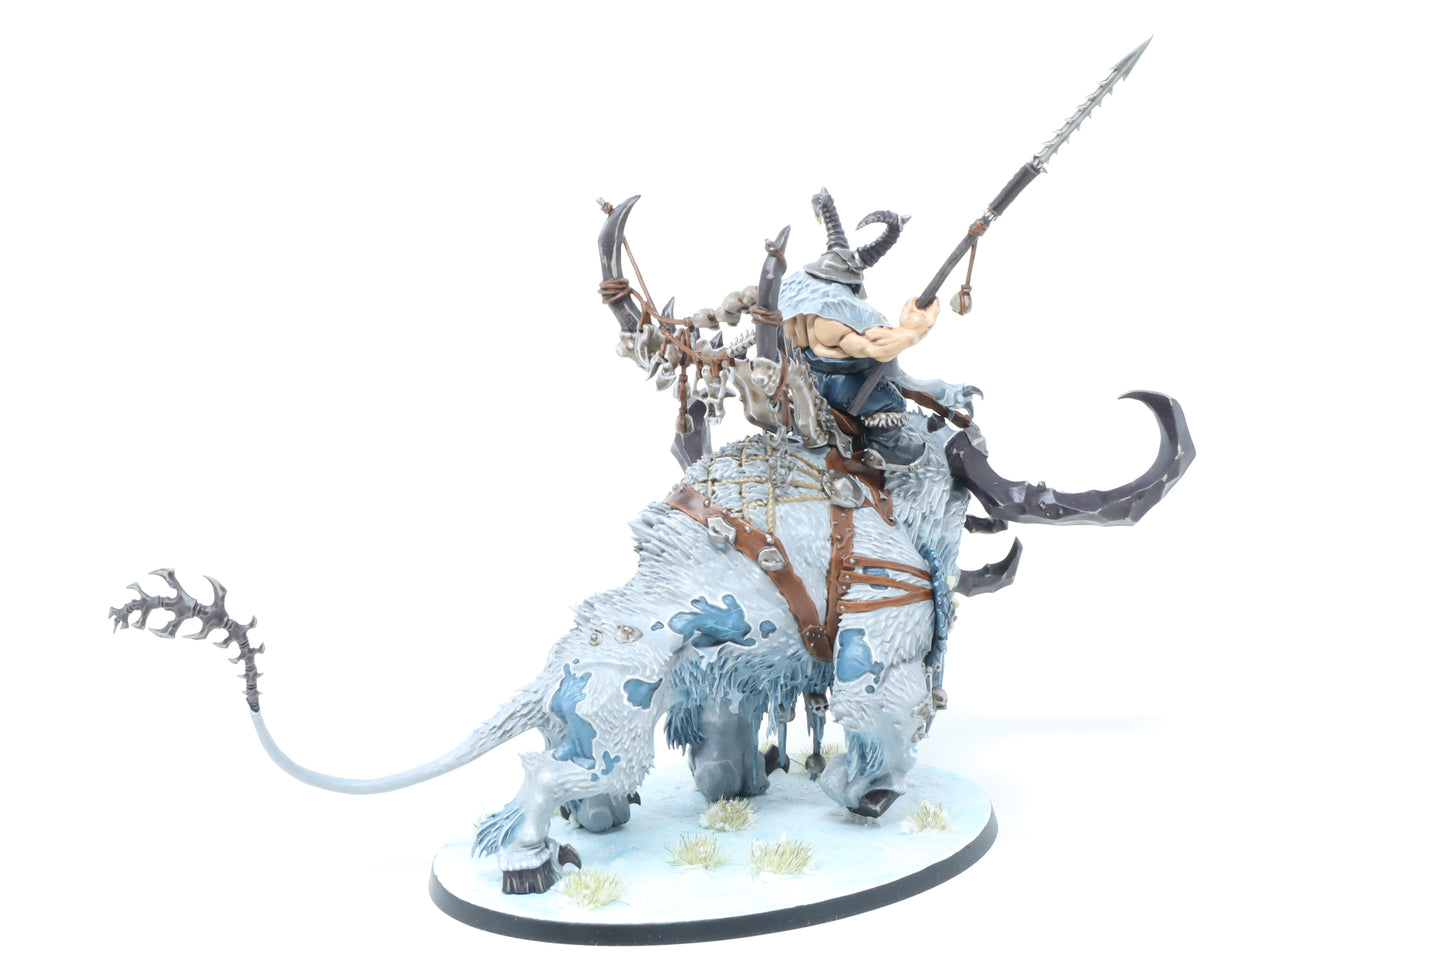 Frostlord on Stonehorn (Well Painted)